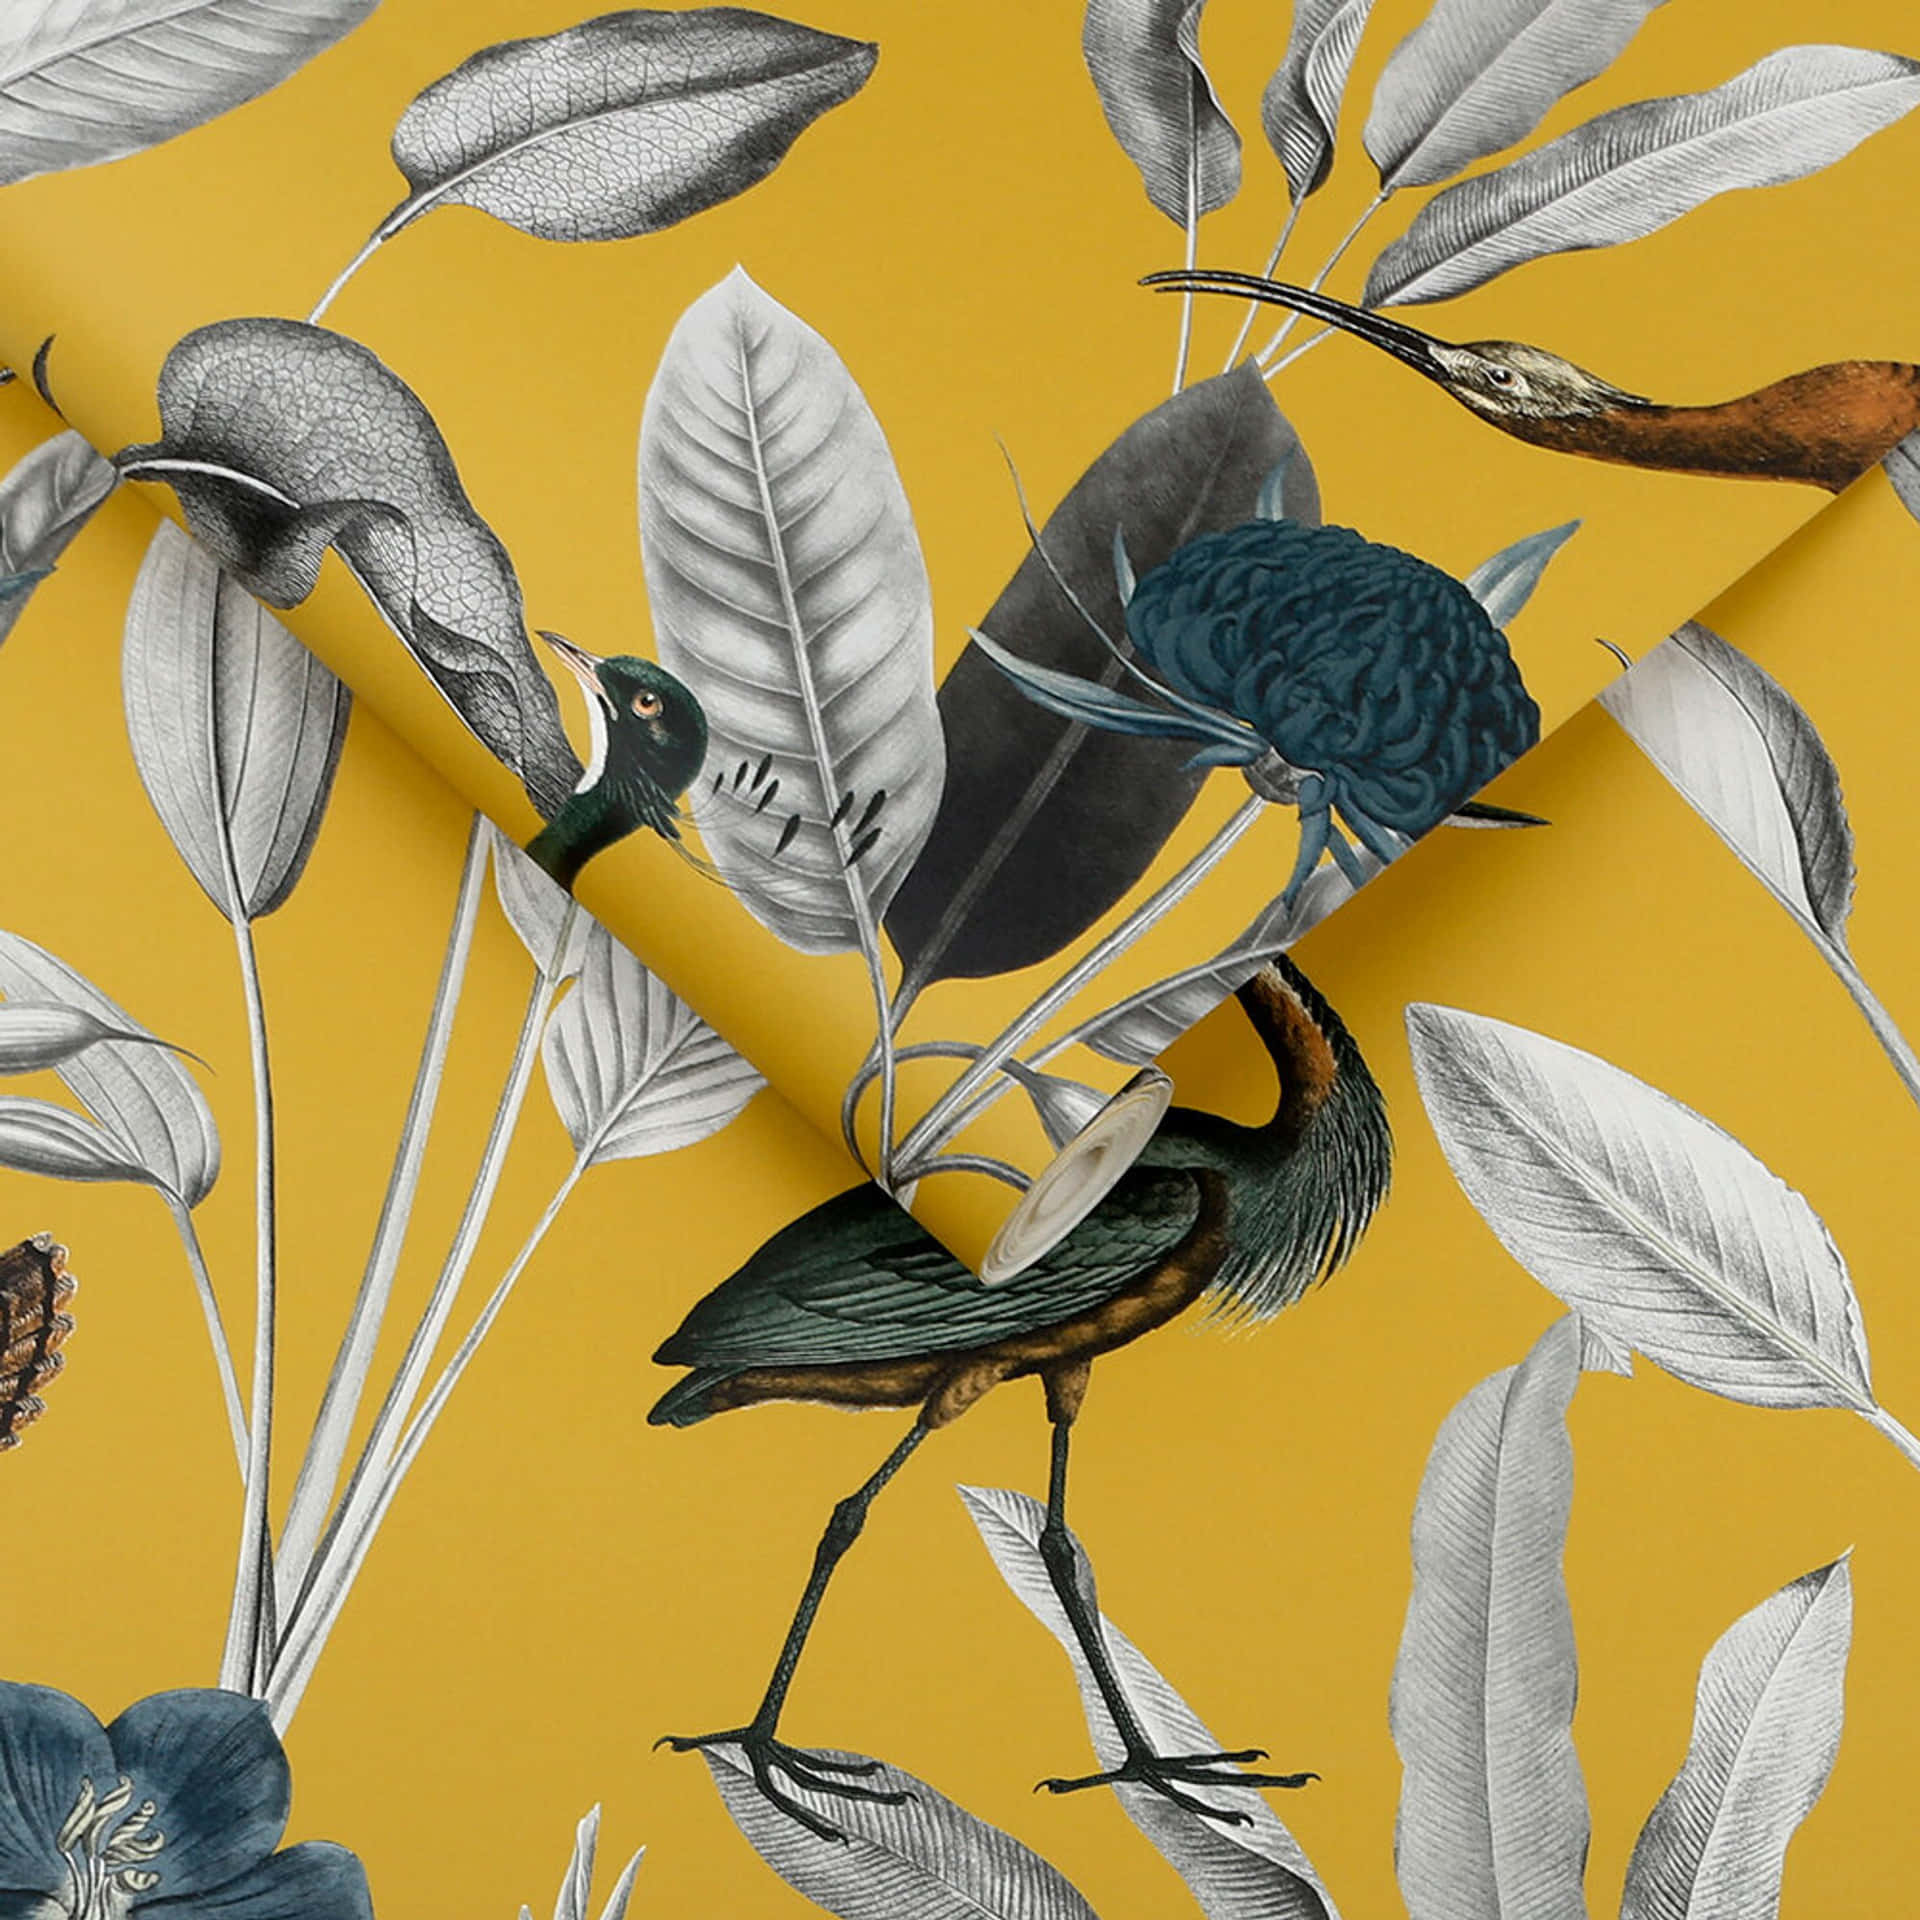 A composition of gray and yellow shapes creates a fascinating pattern Wallpaper